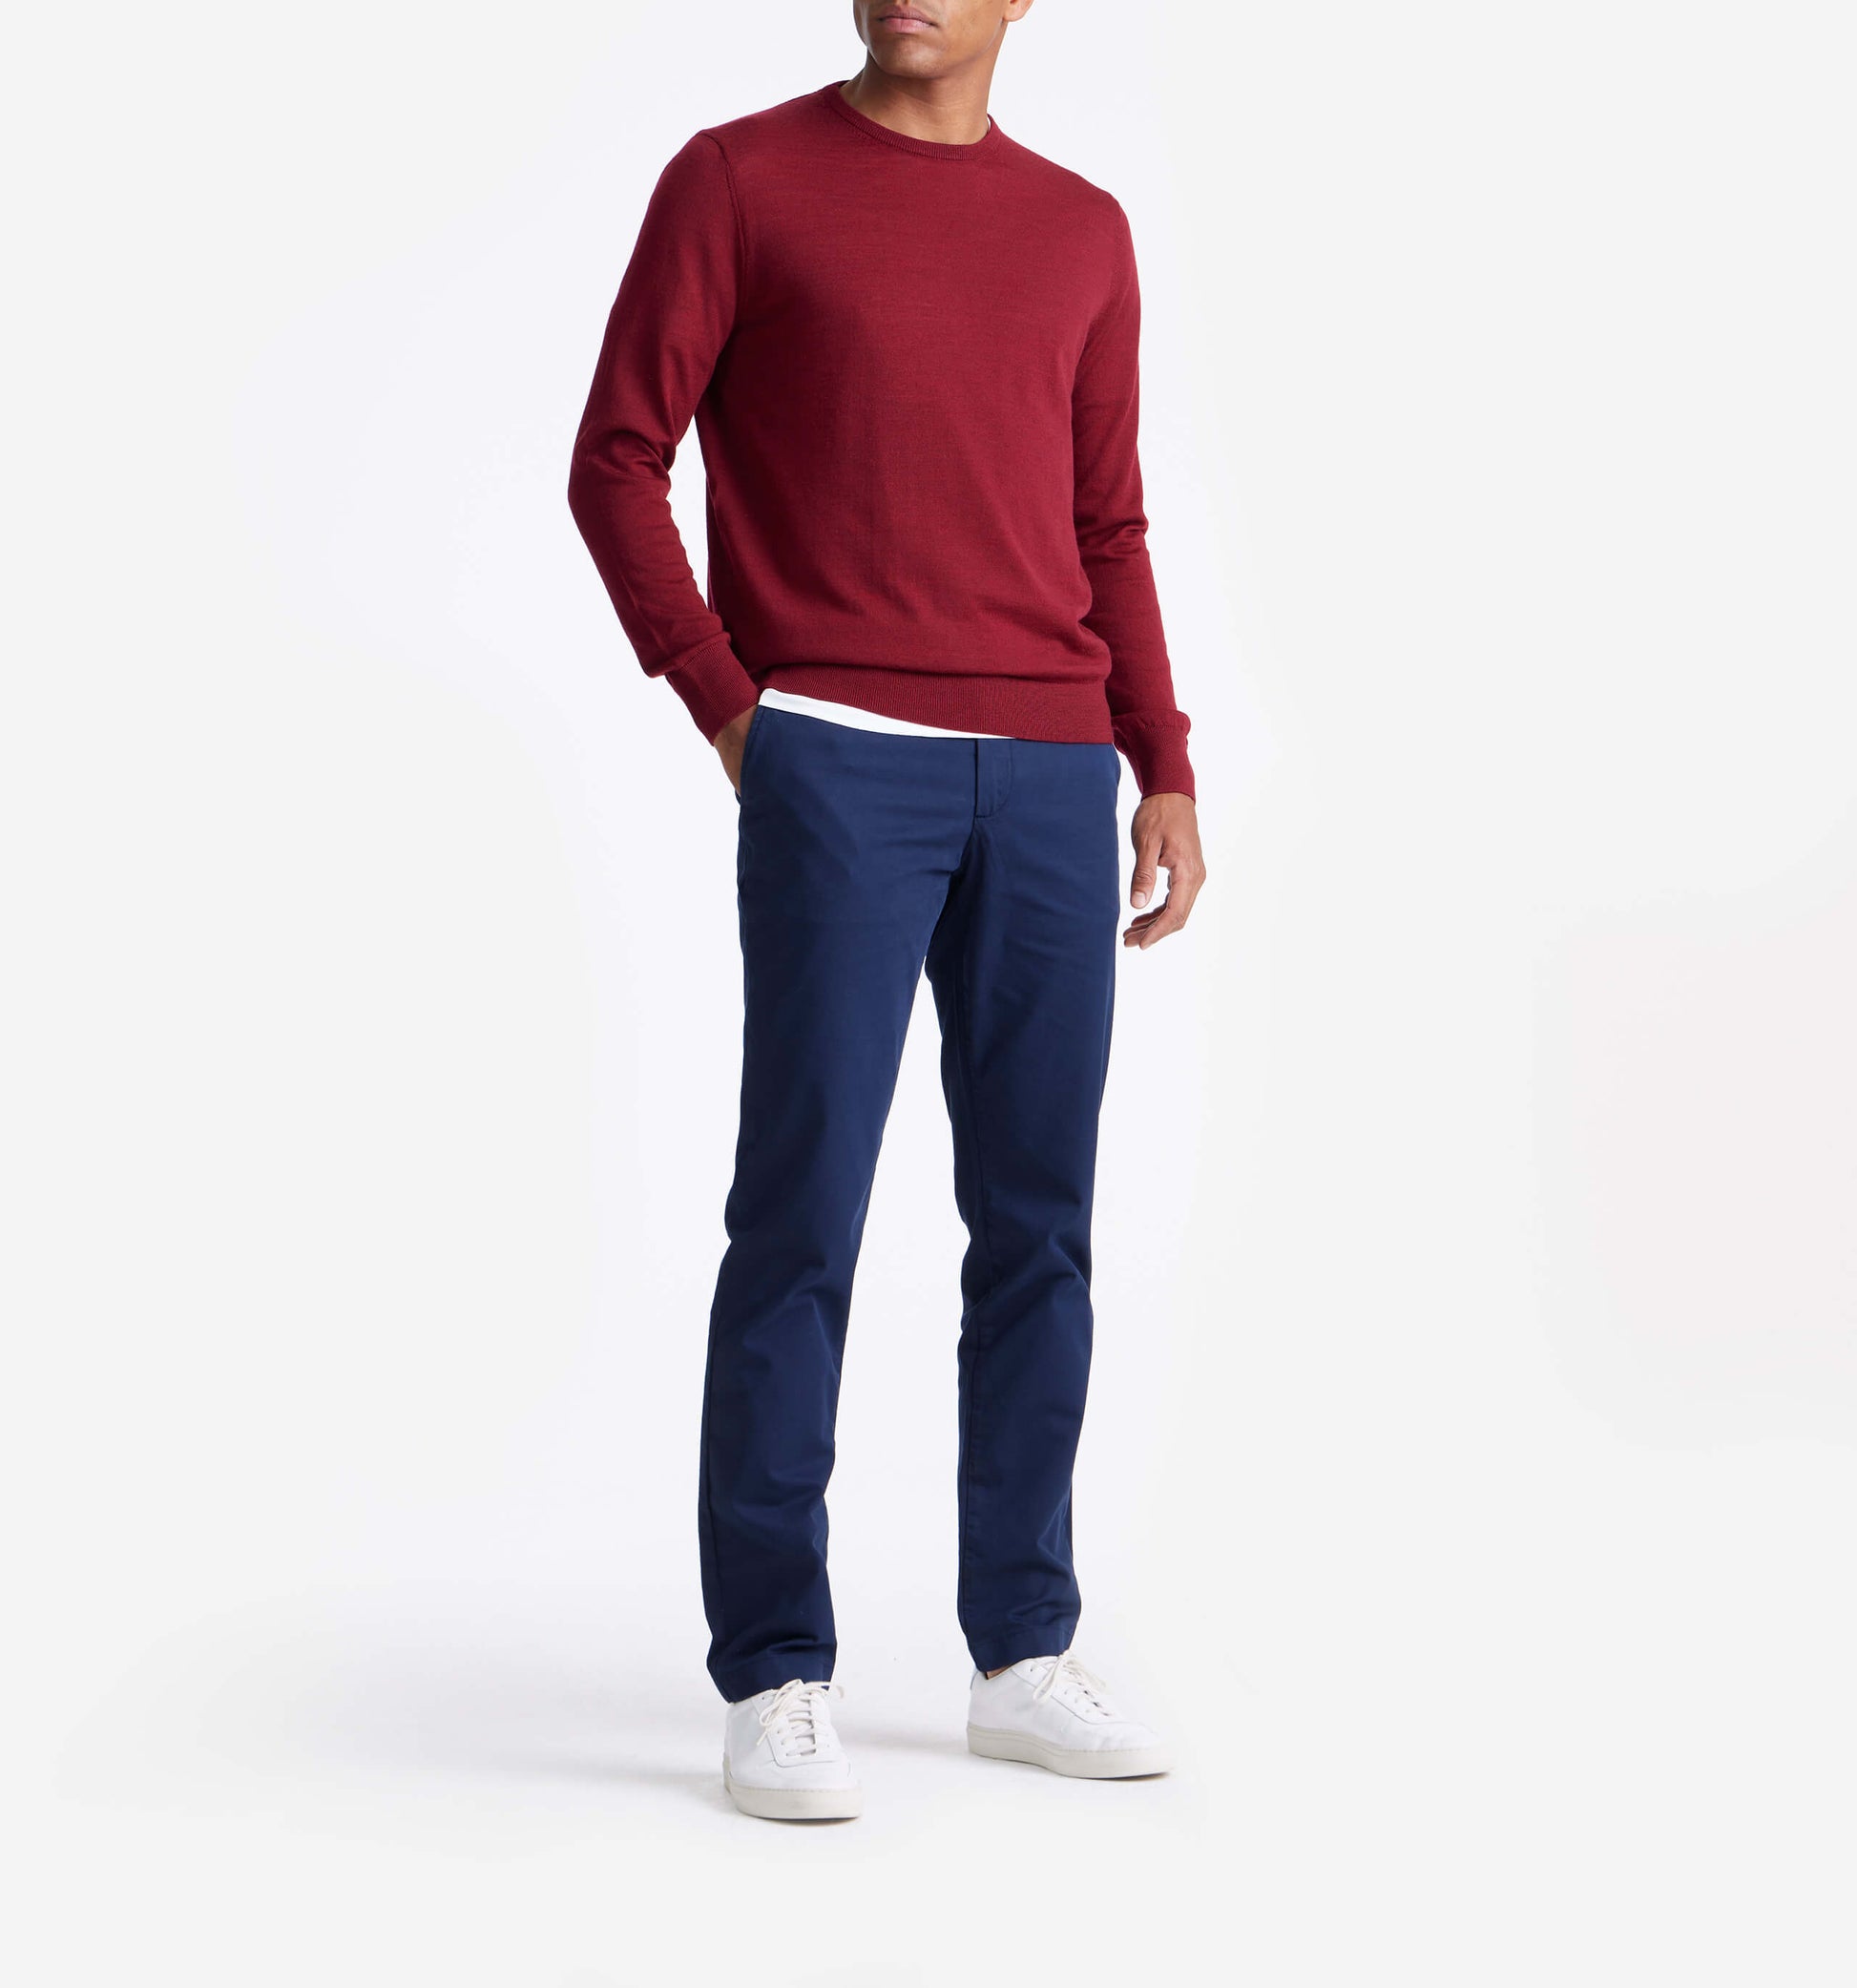 The John - Merino Wool Crewneck In Red From King Essentials